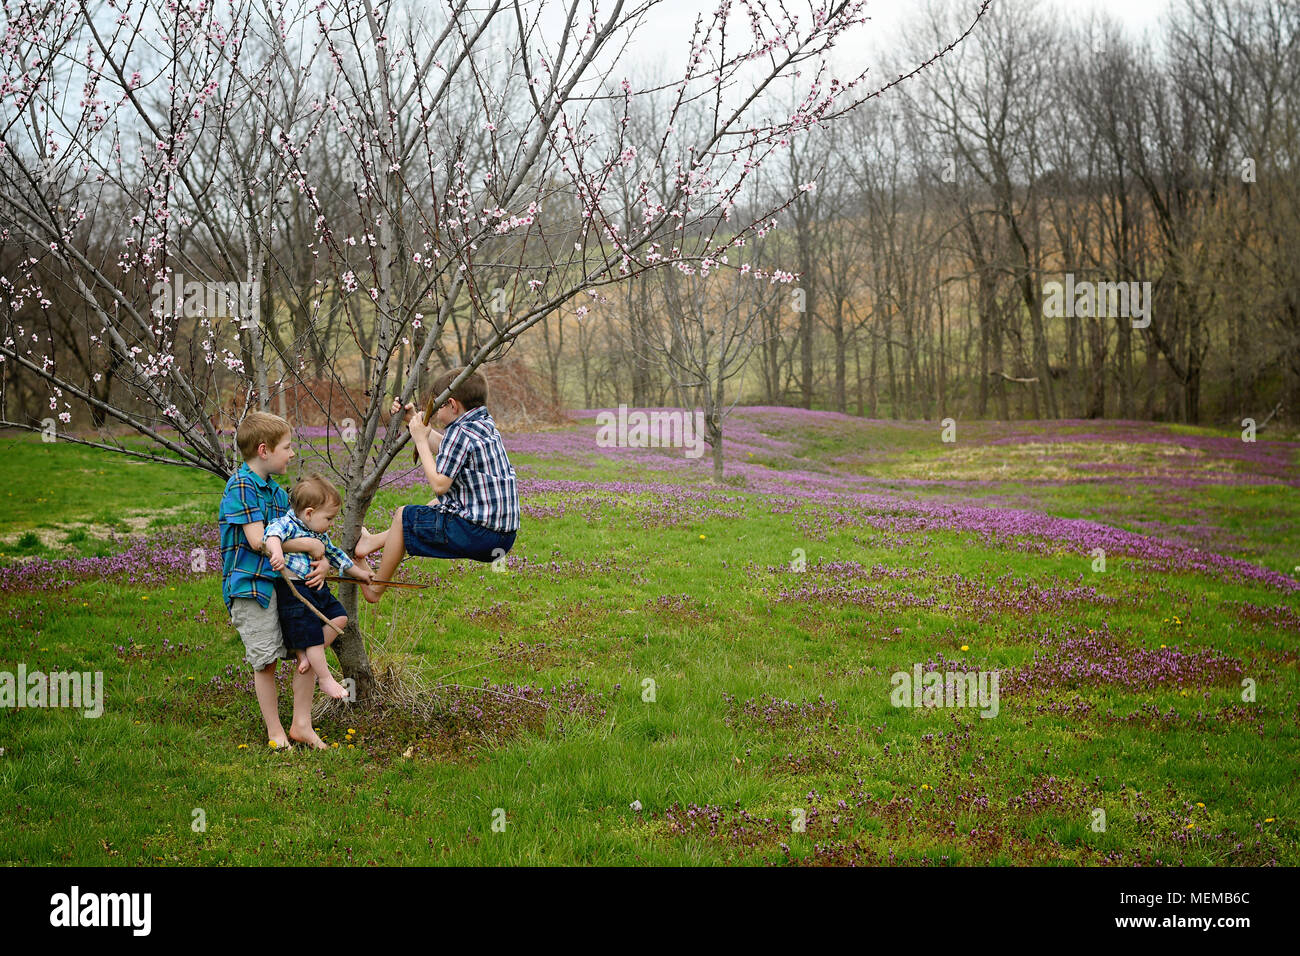 Three brothers together climbing a cherry tree in the spring country landscape Stock Photo